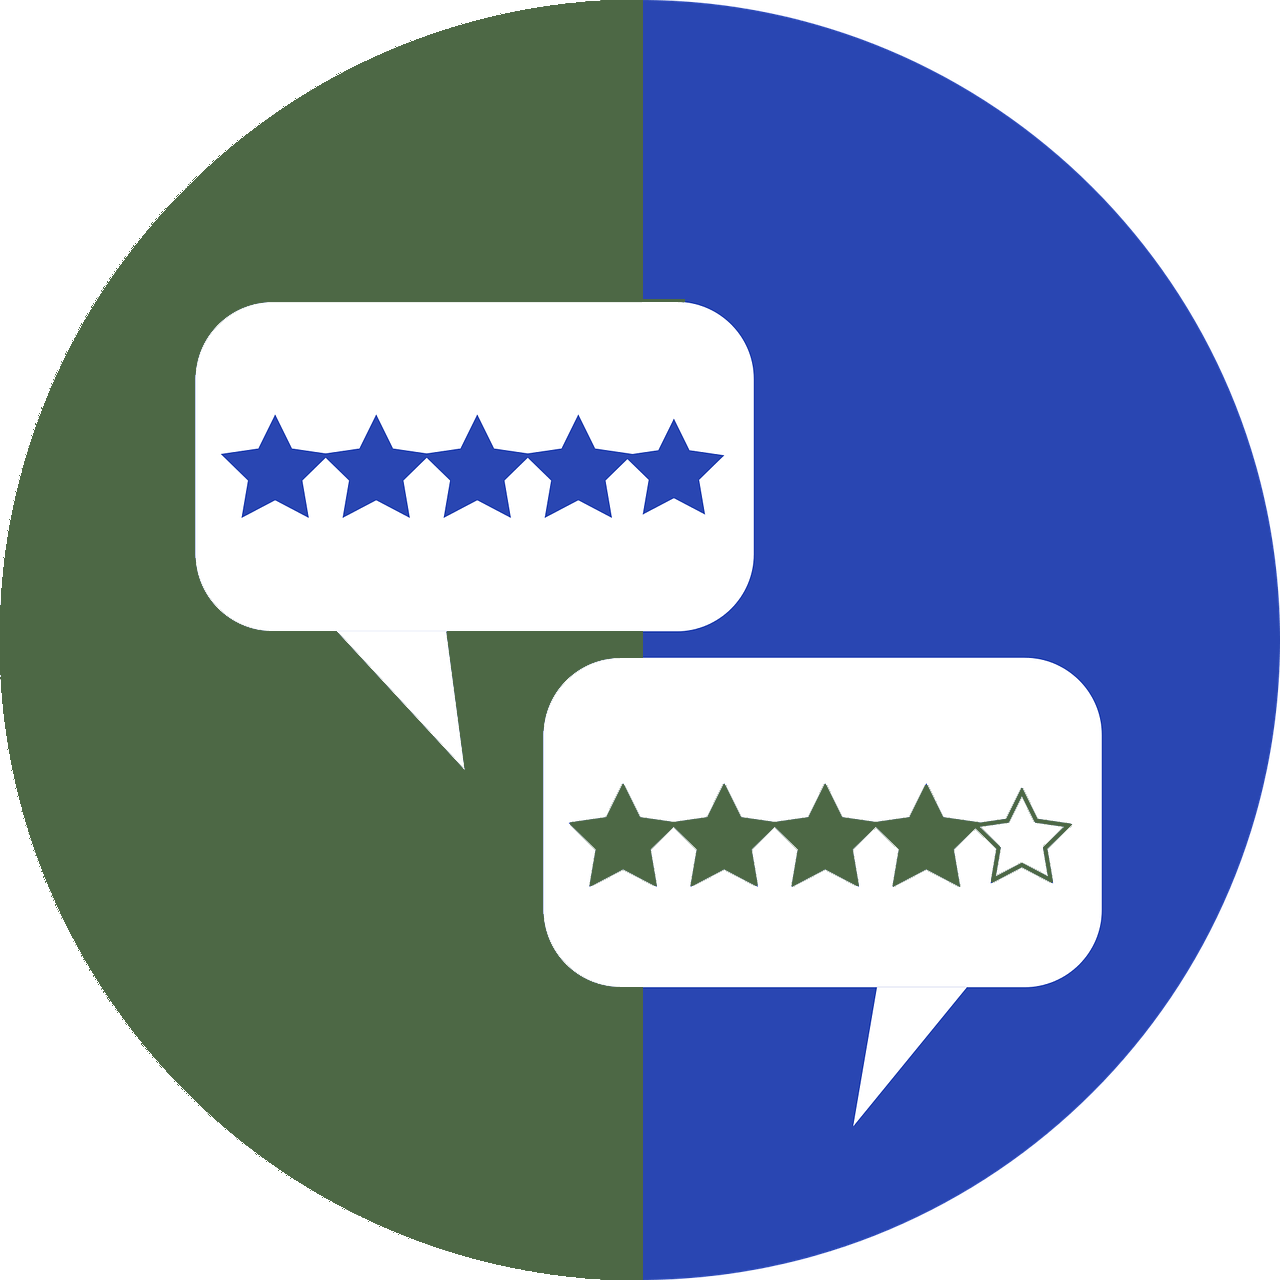 chat bubbles with review stars